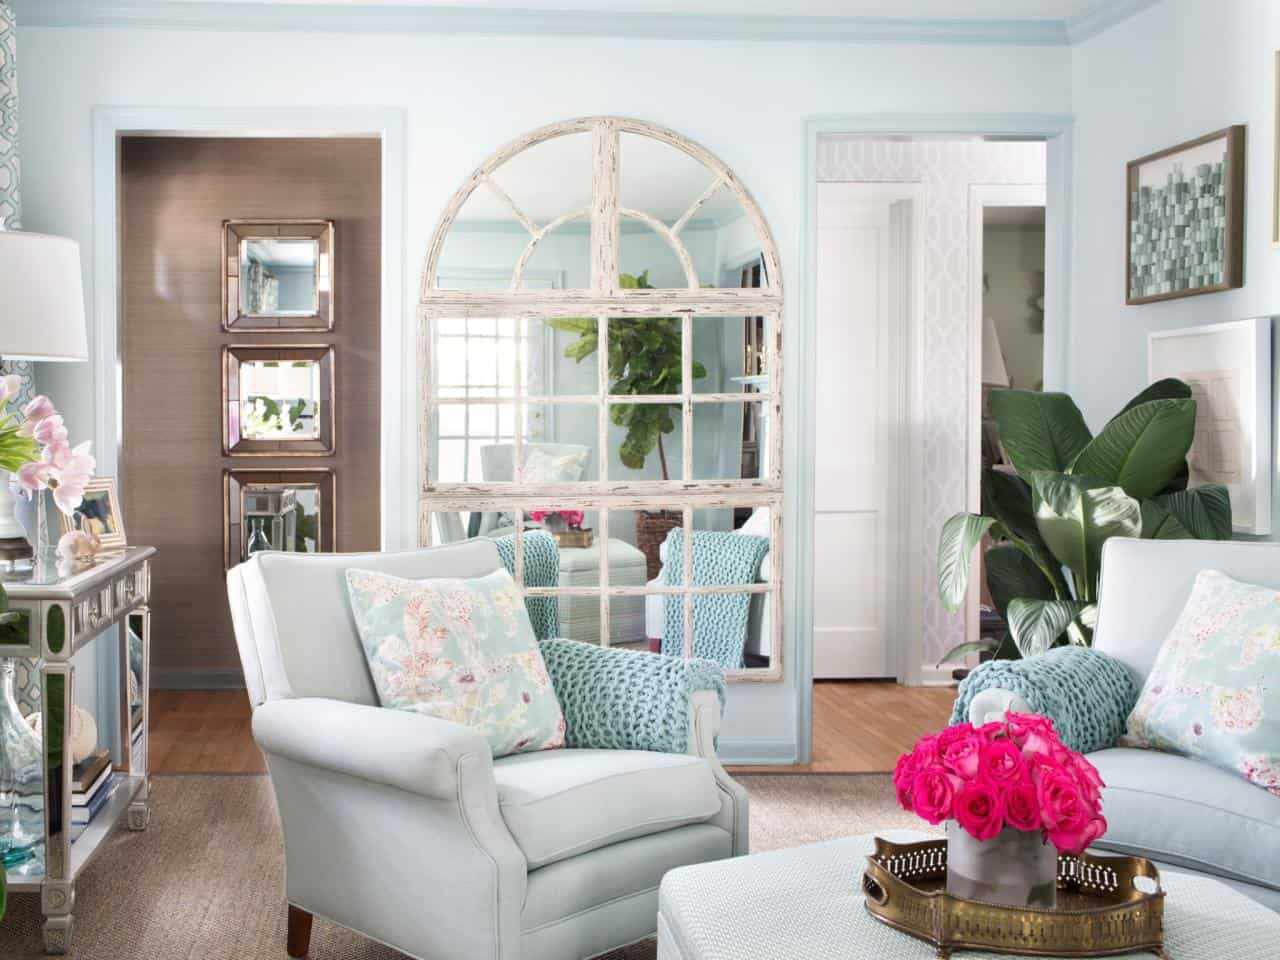 Mirrors add to the space instead which is perfect when you are working with a small living room.